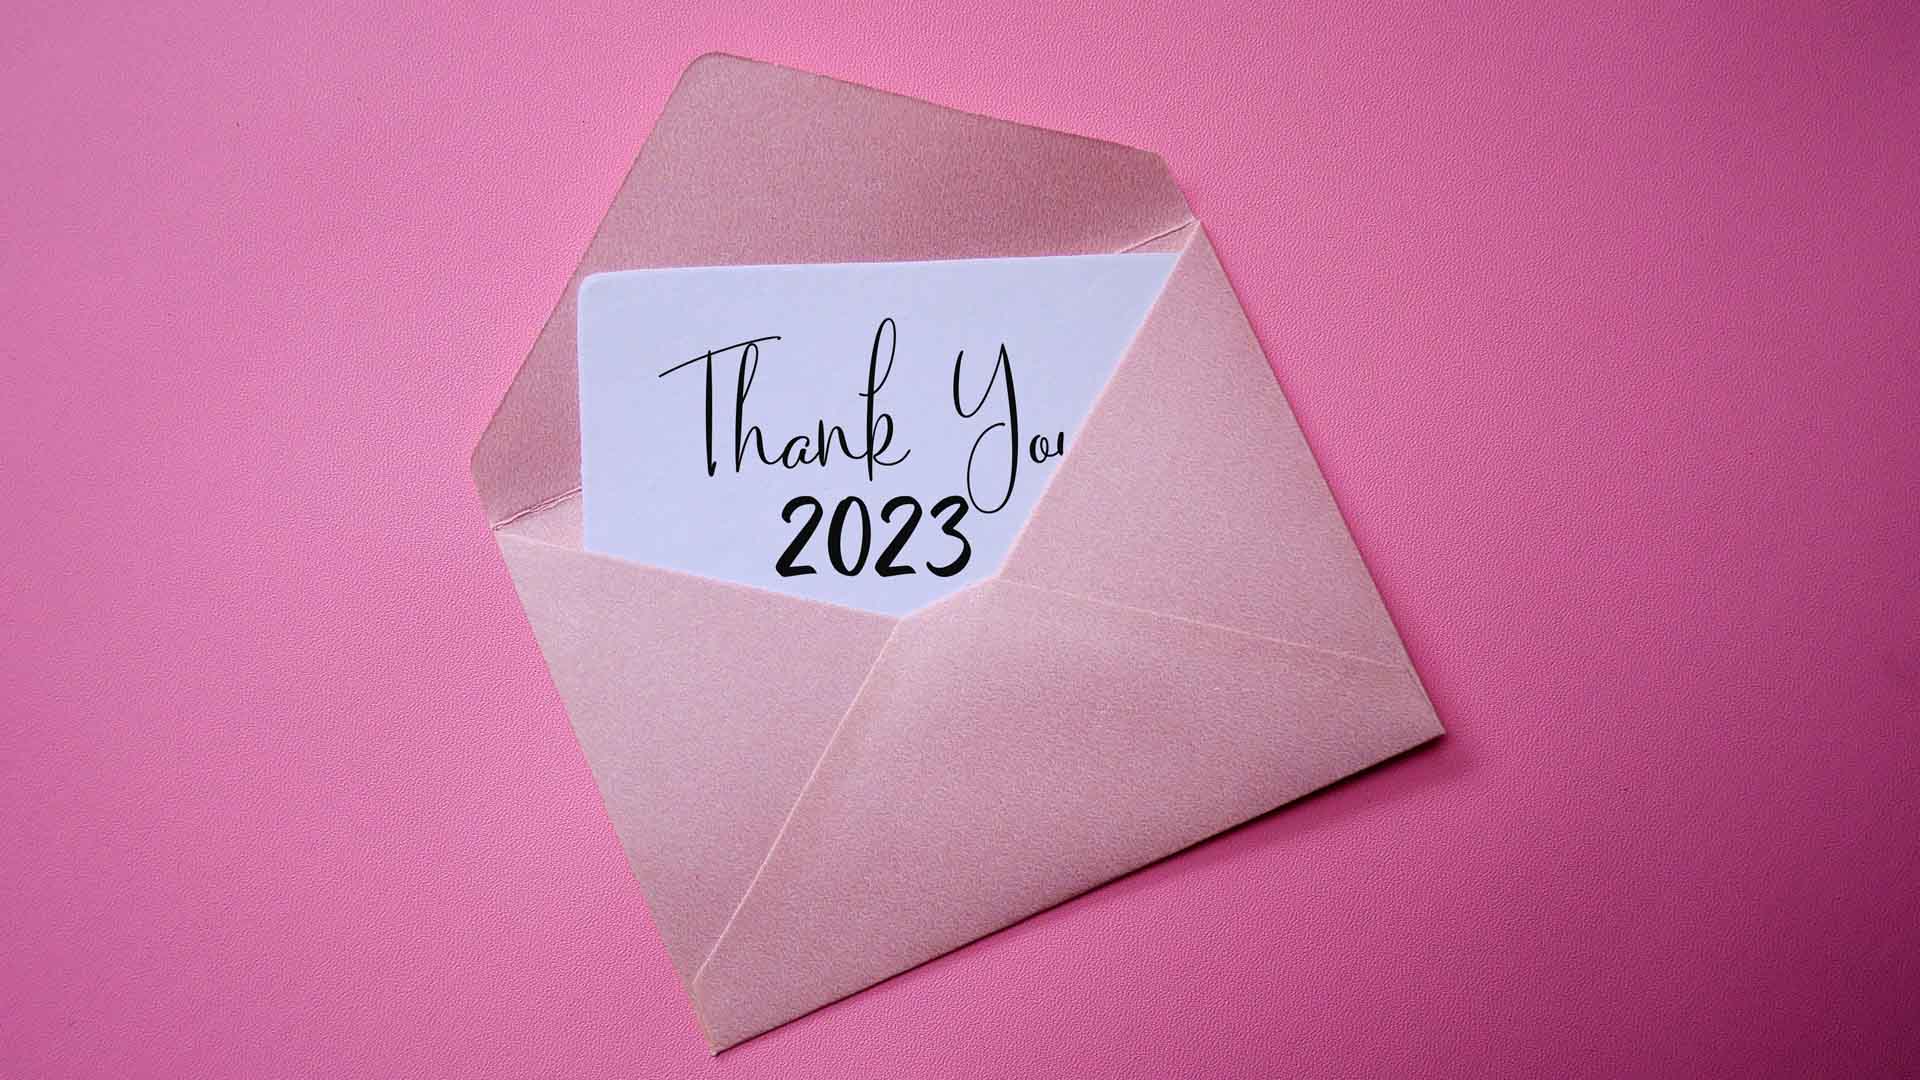 Thank you 2023 – Learning Everest’s Year in Review